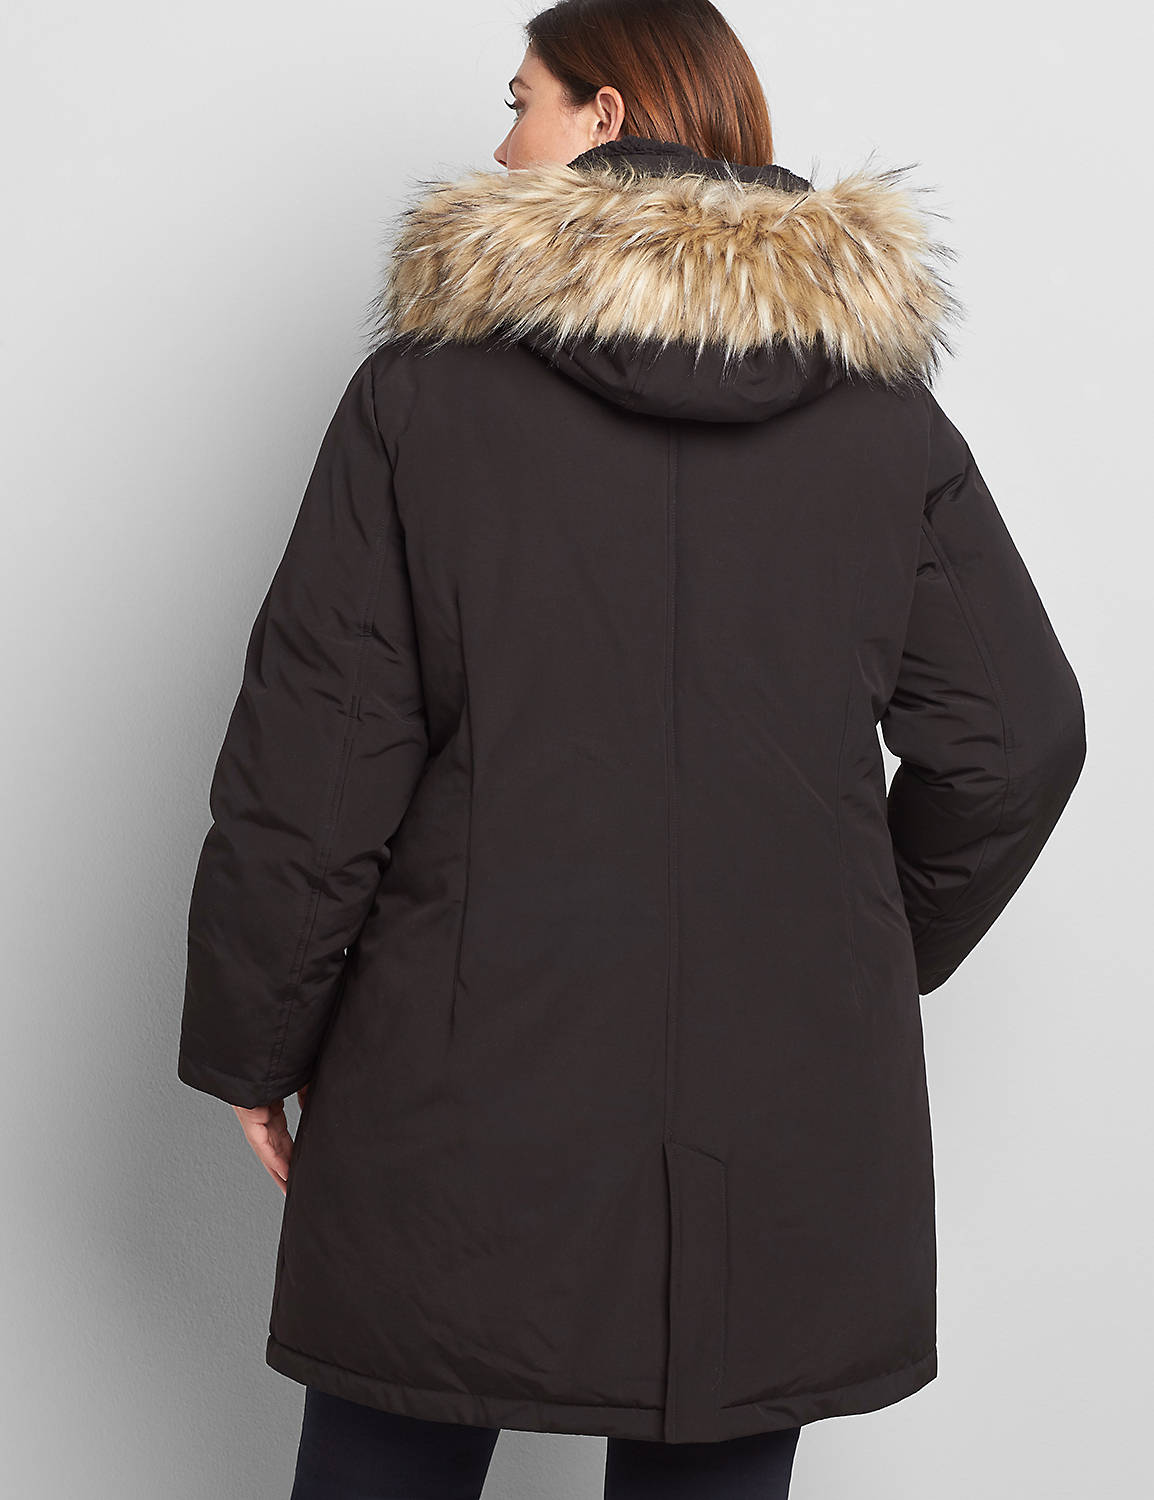 Rothschild Nylon Parka with Fur Hood 1114924:Pitch Black LB 1000322:10/12 Product Image 2